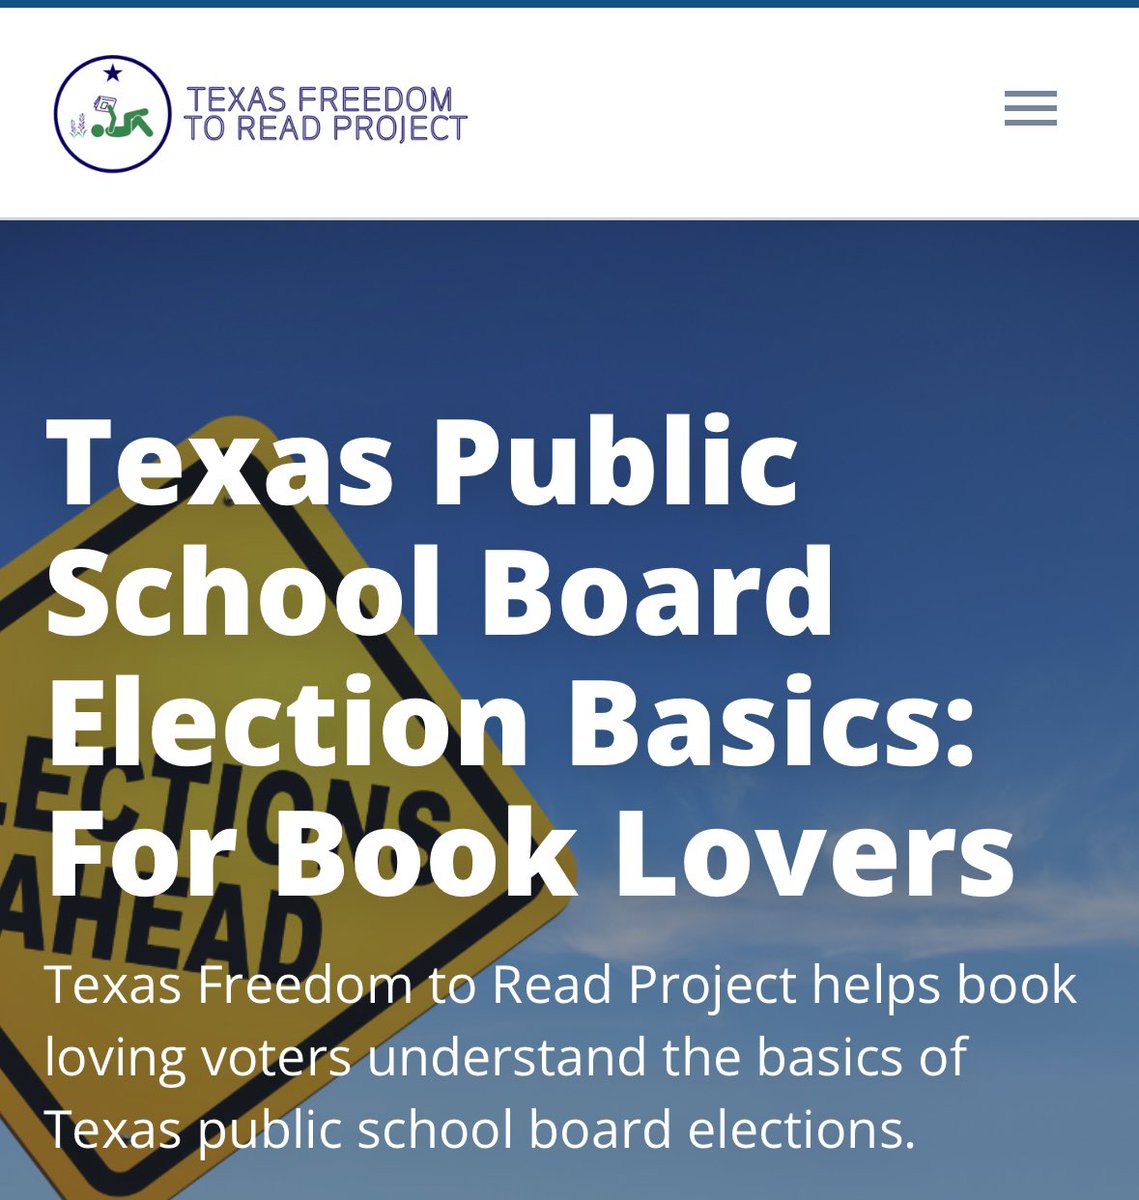 If every single Texan who supports the freedom to read in Texas and opposes book bans showed up to vote, we could easily out vote the extremists responsible for the current tidal wave of bans.  txftrp.org/school_board_b…